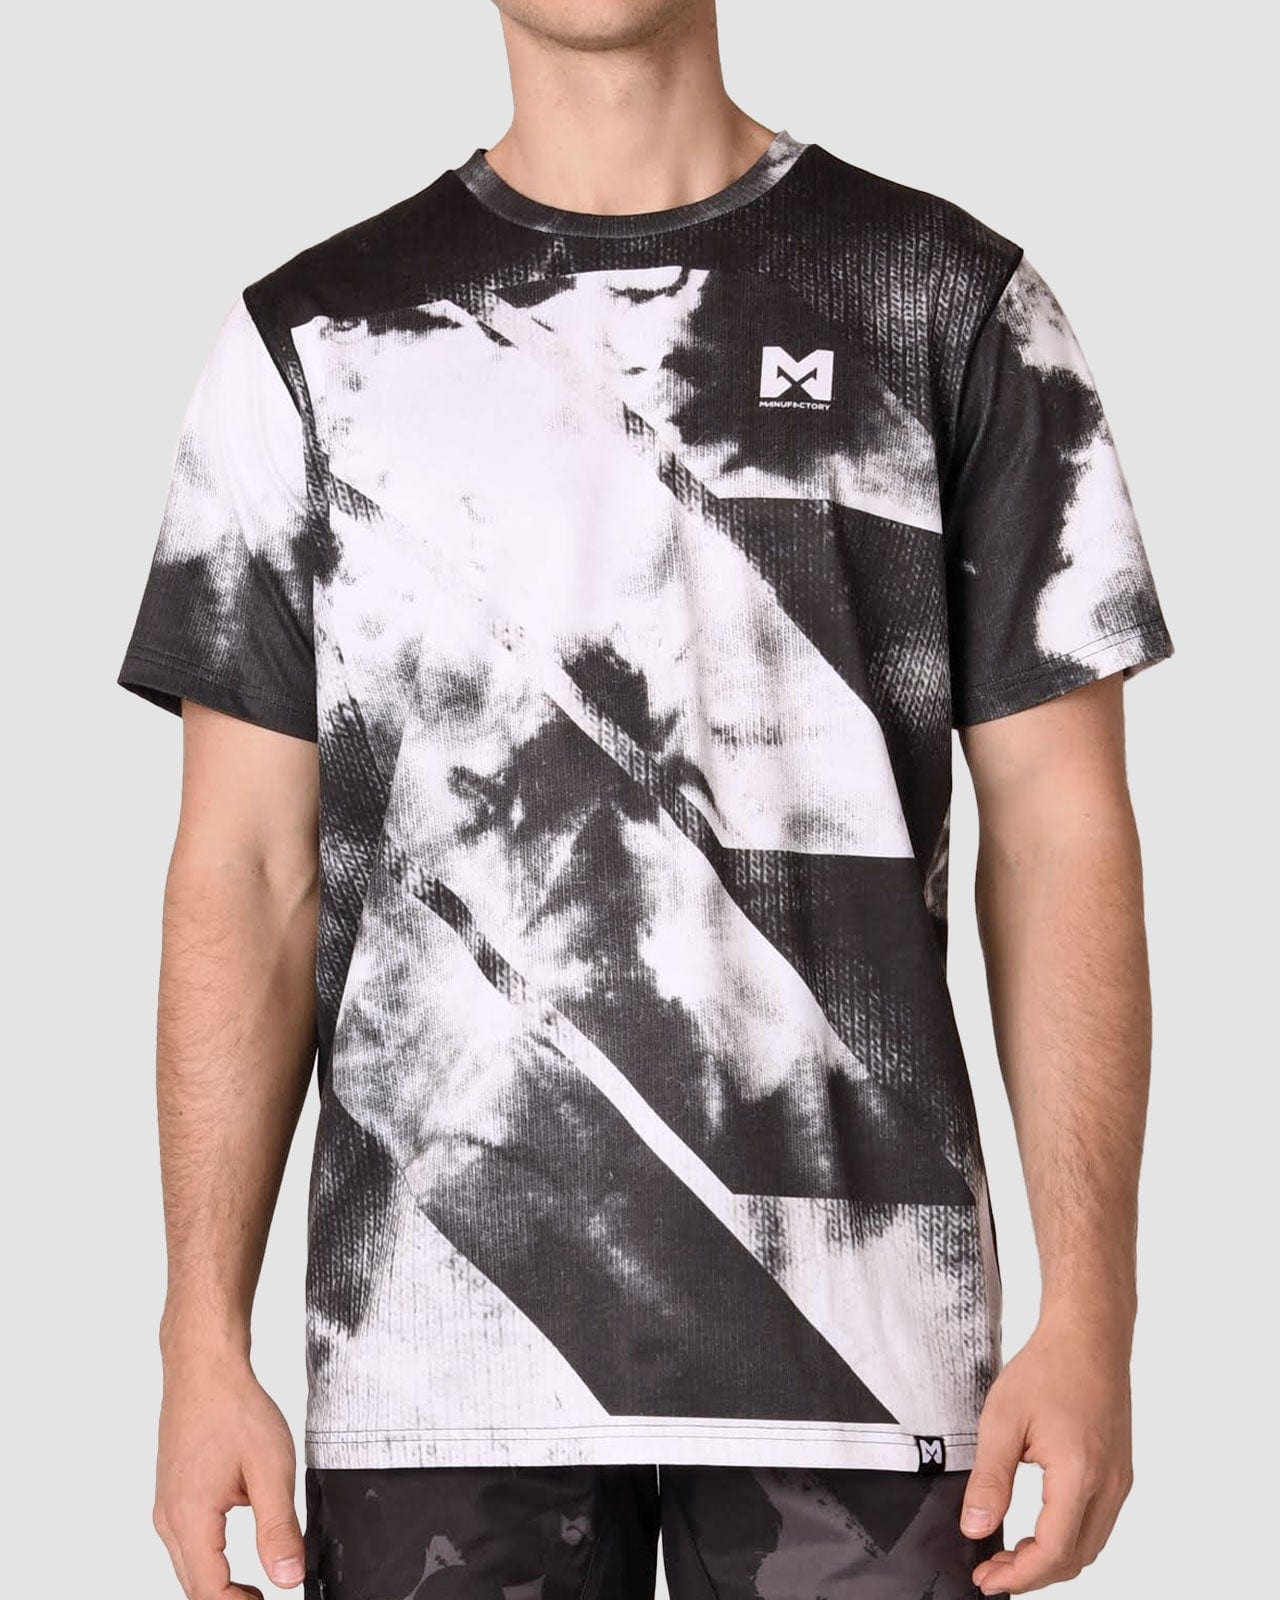 Manufactory Apparel Physical product Electrix DryTECH T-Shirt